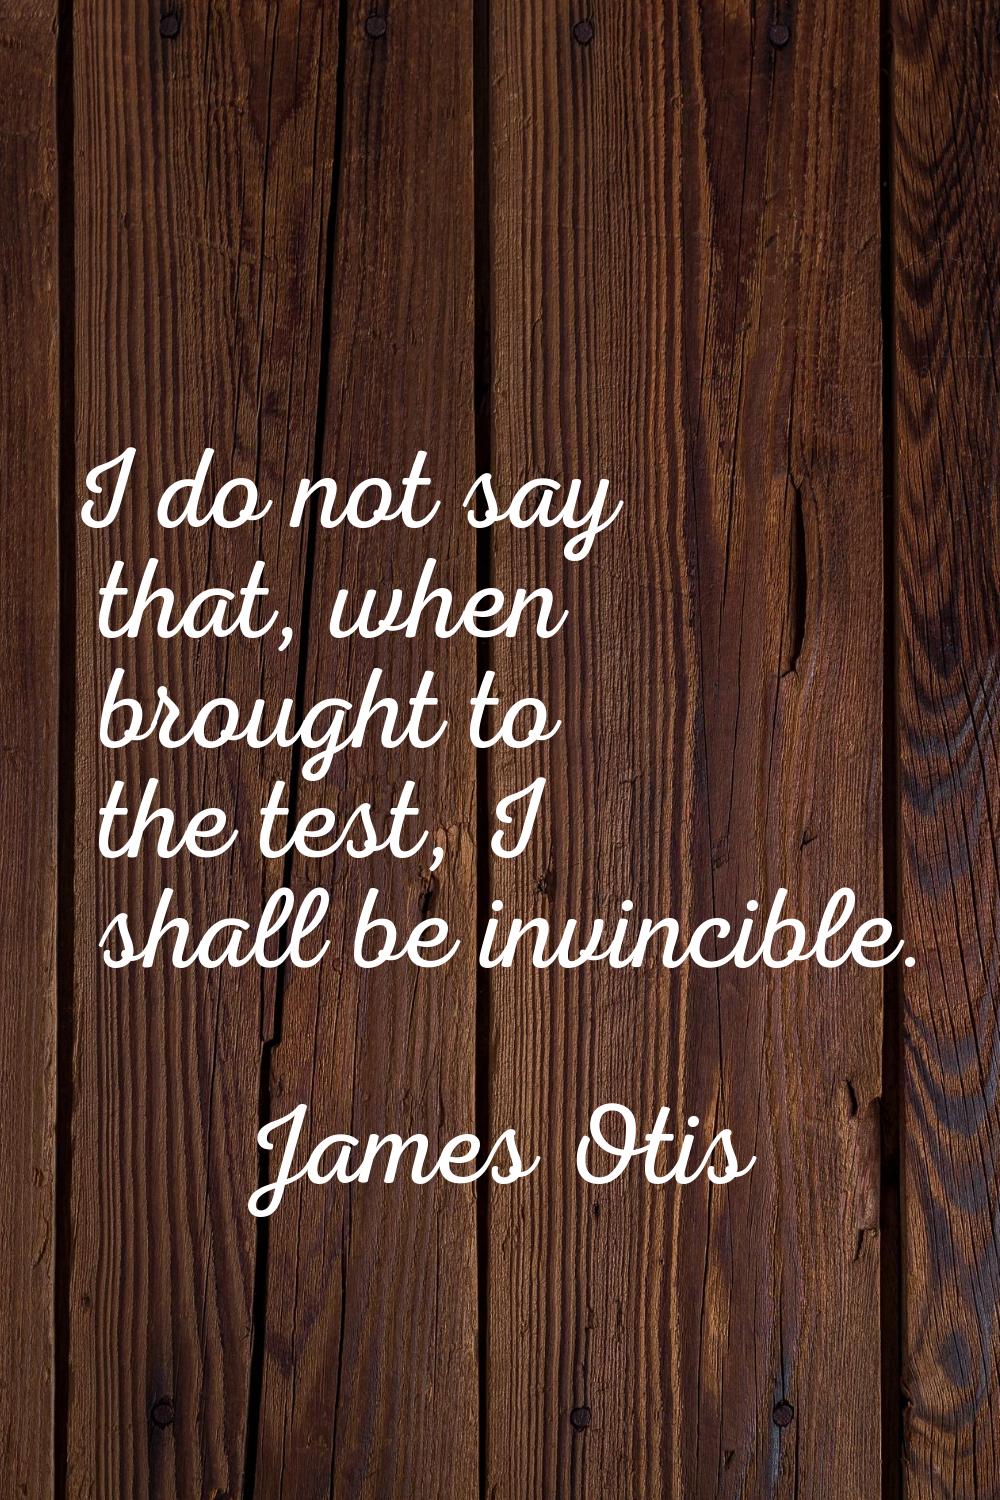 I do not say that, when brought to the test, I shall be invincible.